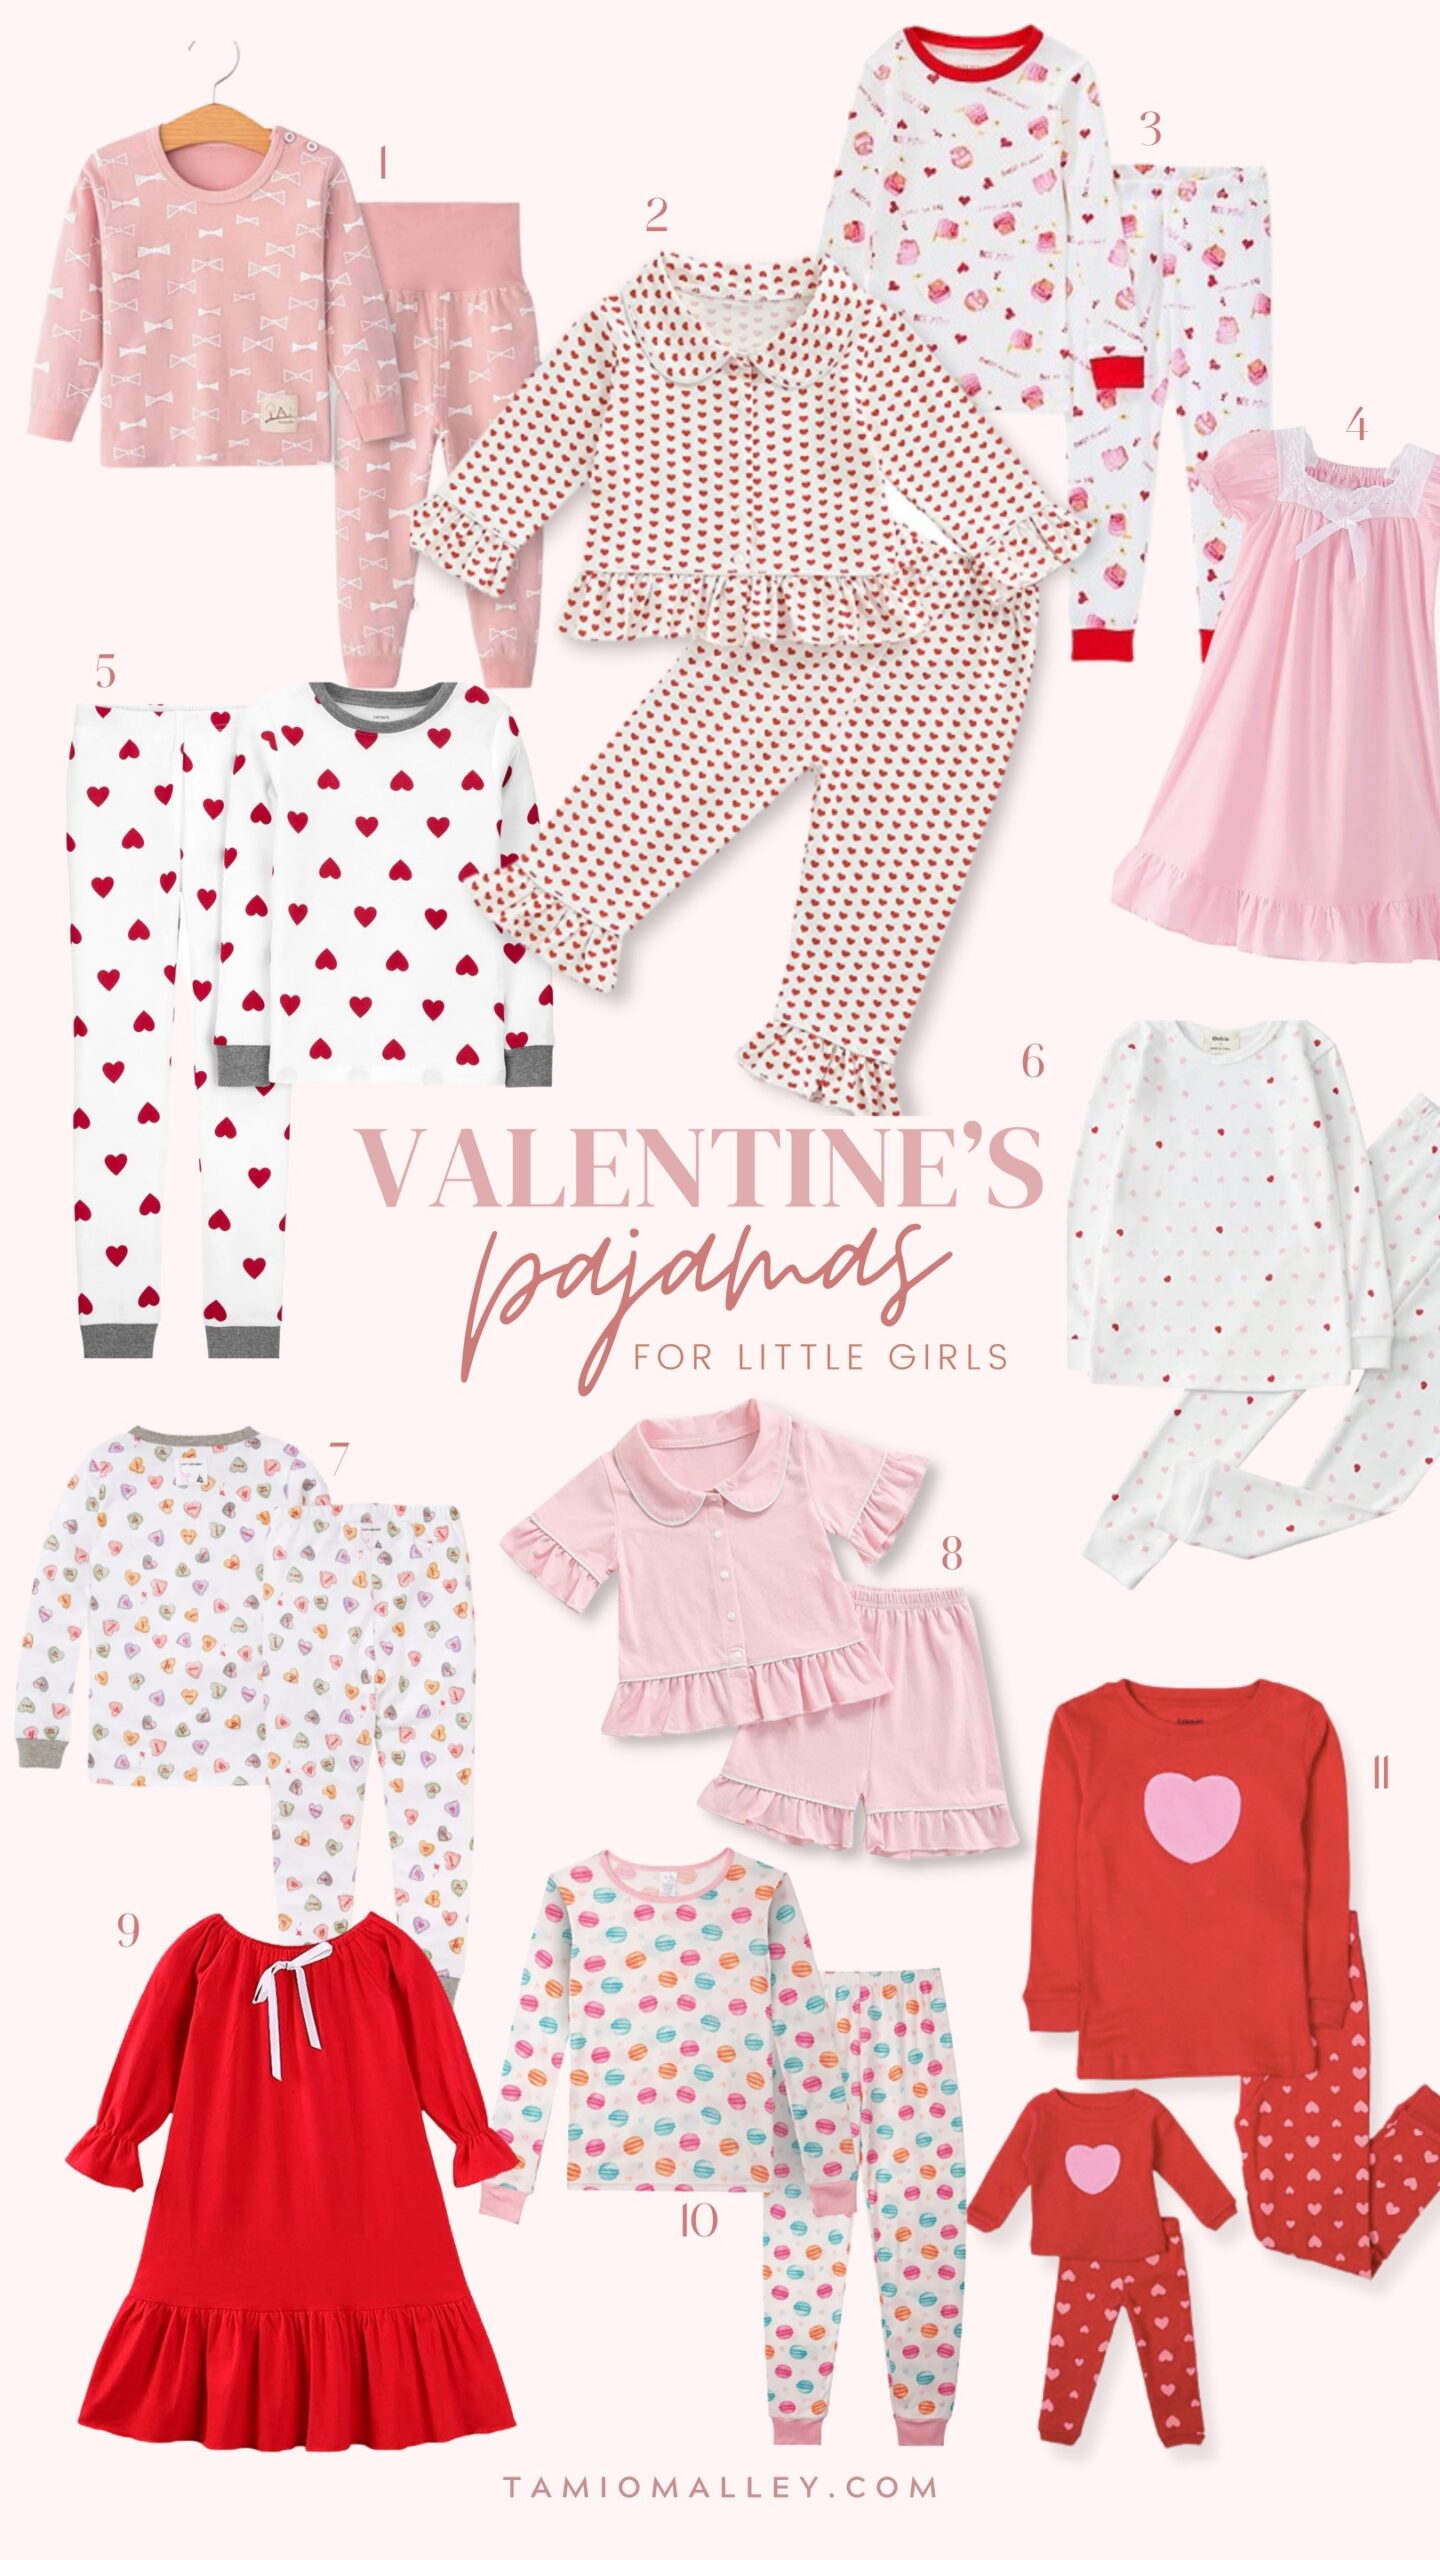 Tami O'Malley - Valentine's Day Pajamas for Girls